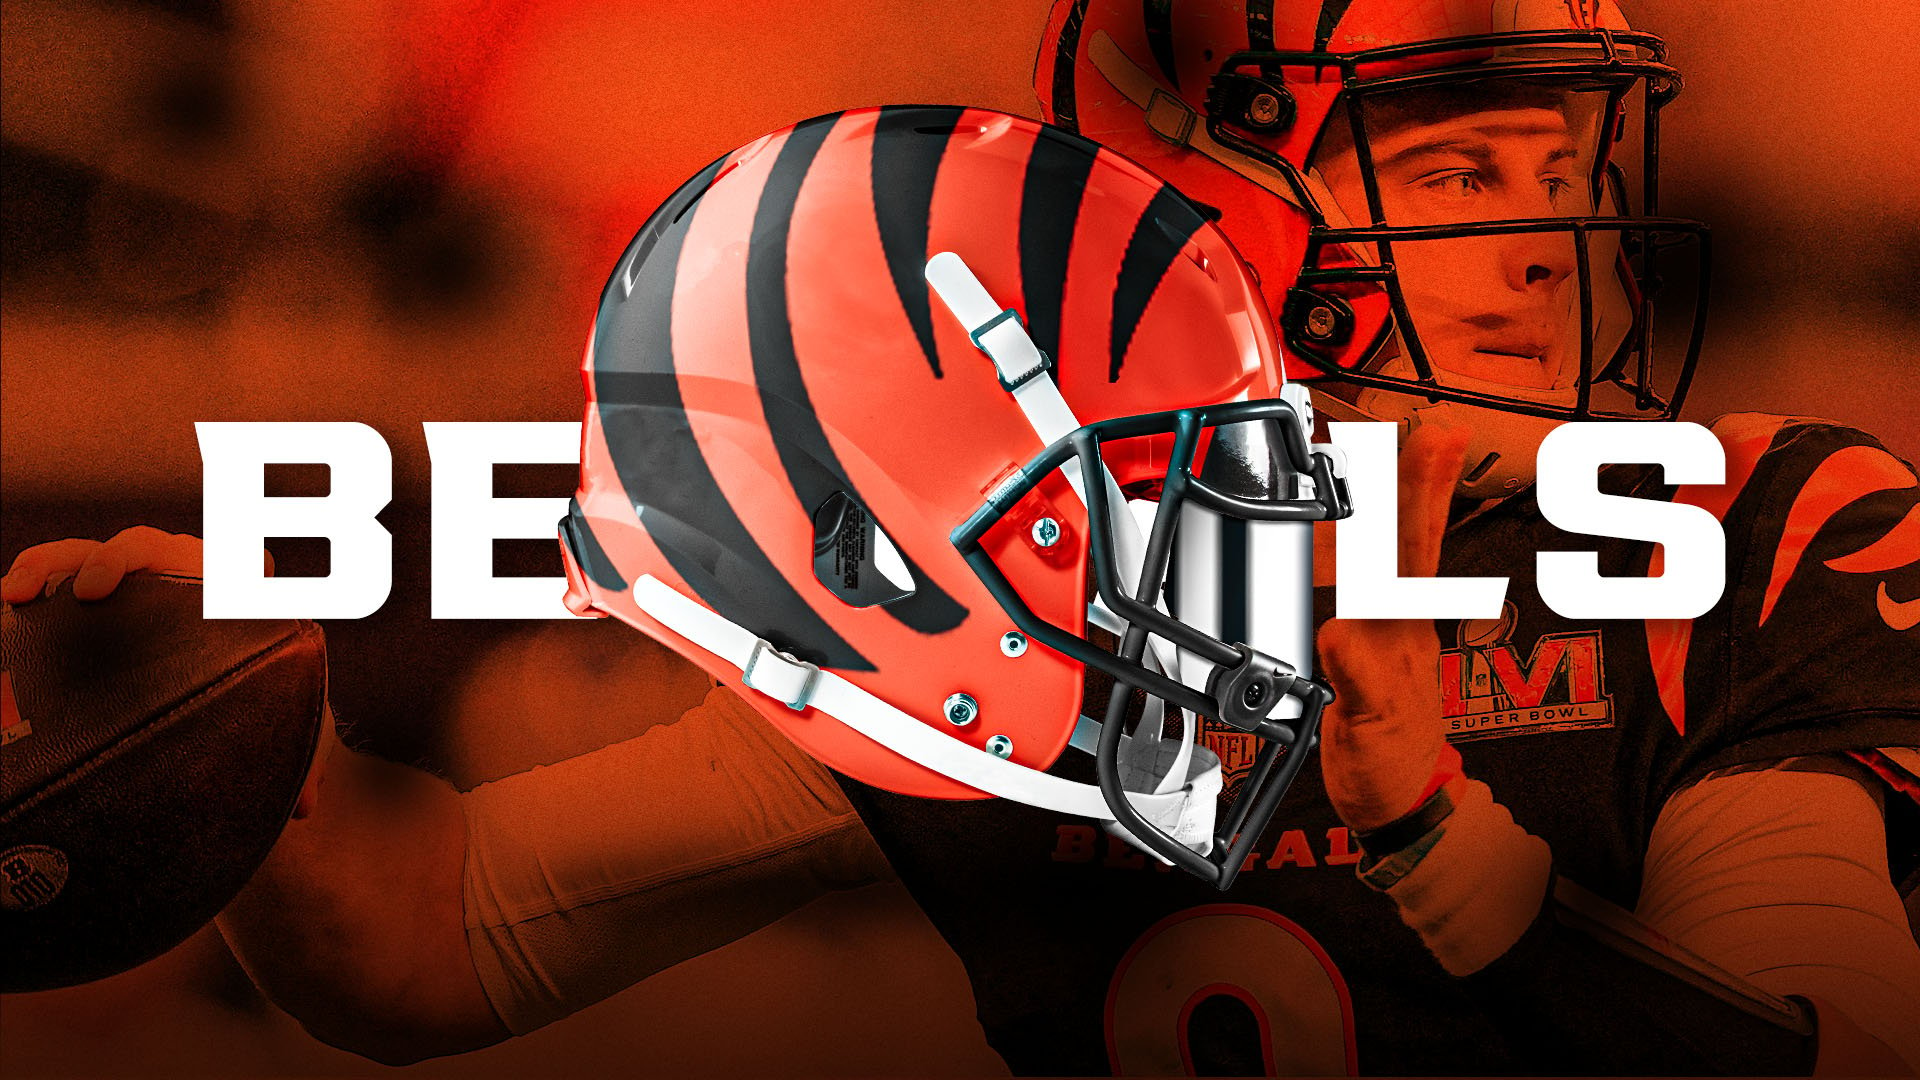 are the cincinnati bengals playing football today